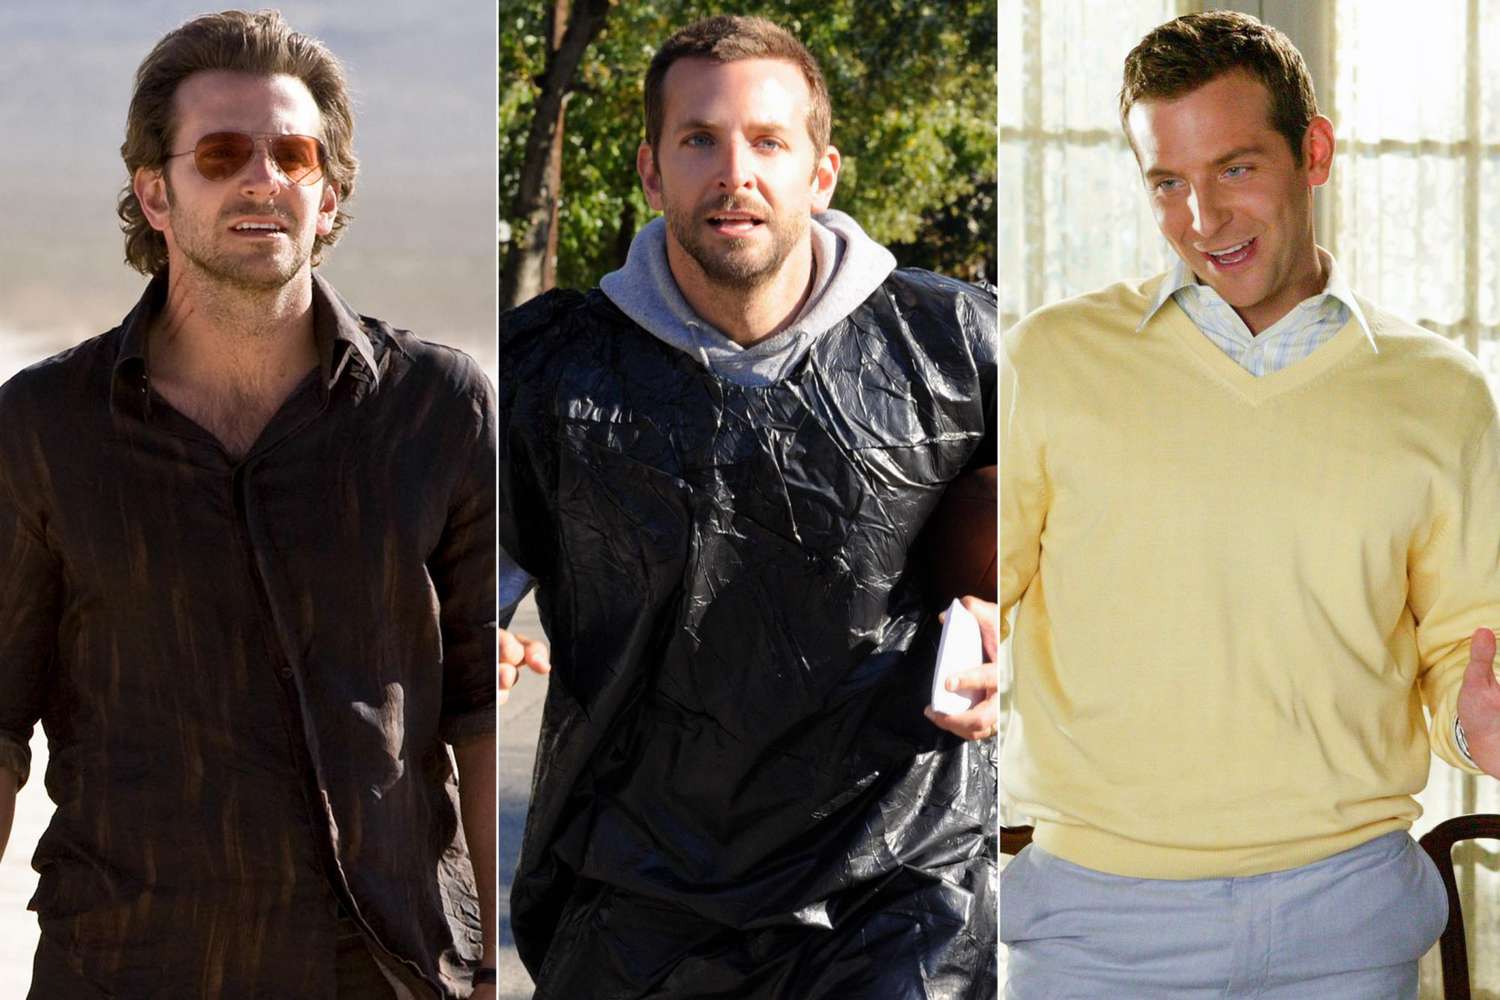 The Hangover (2009) BRADLEY COOPER SILVER LININGS PLAYBOOK (2012) BRADLEY COOPER Wedding Crashers Bradley Cooper